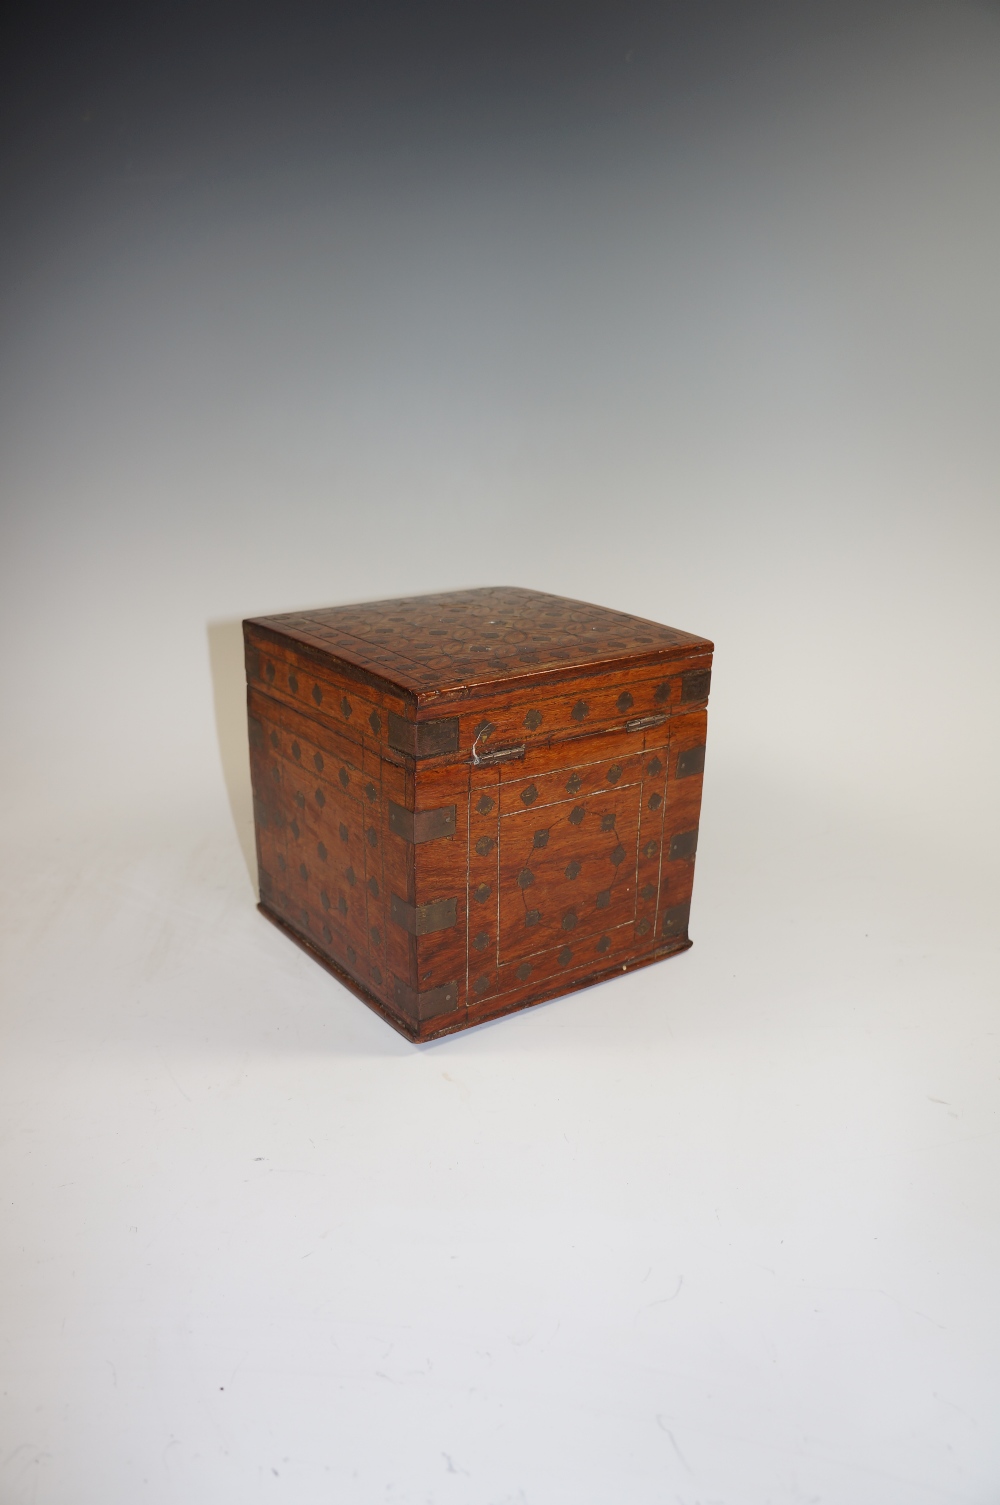 A brass bound hardwood box inlaid overal - Image 3 of 4